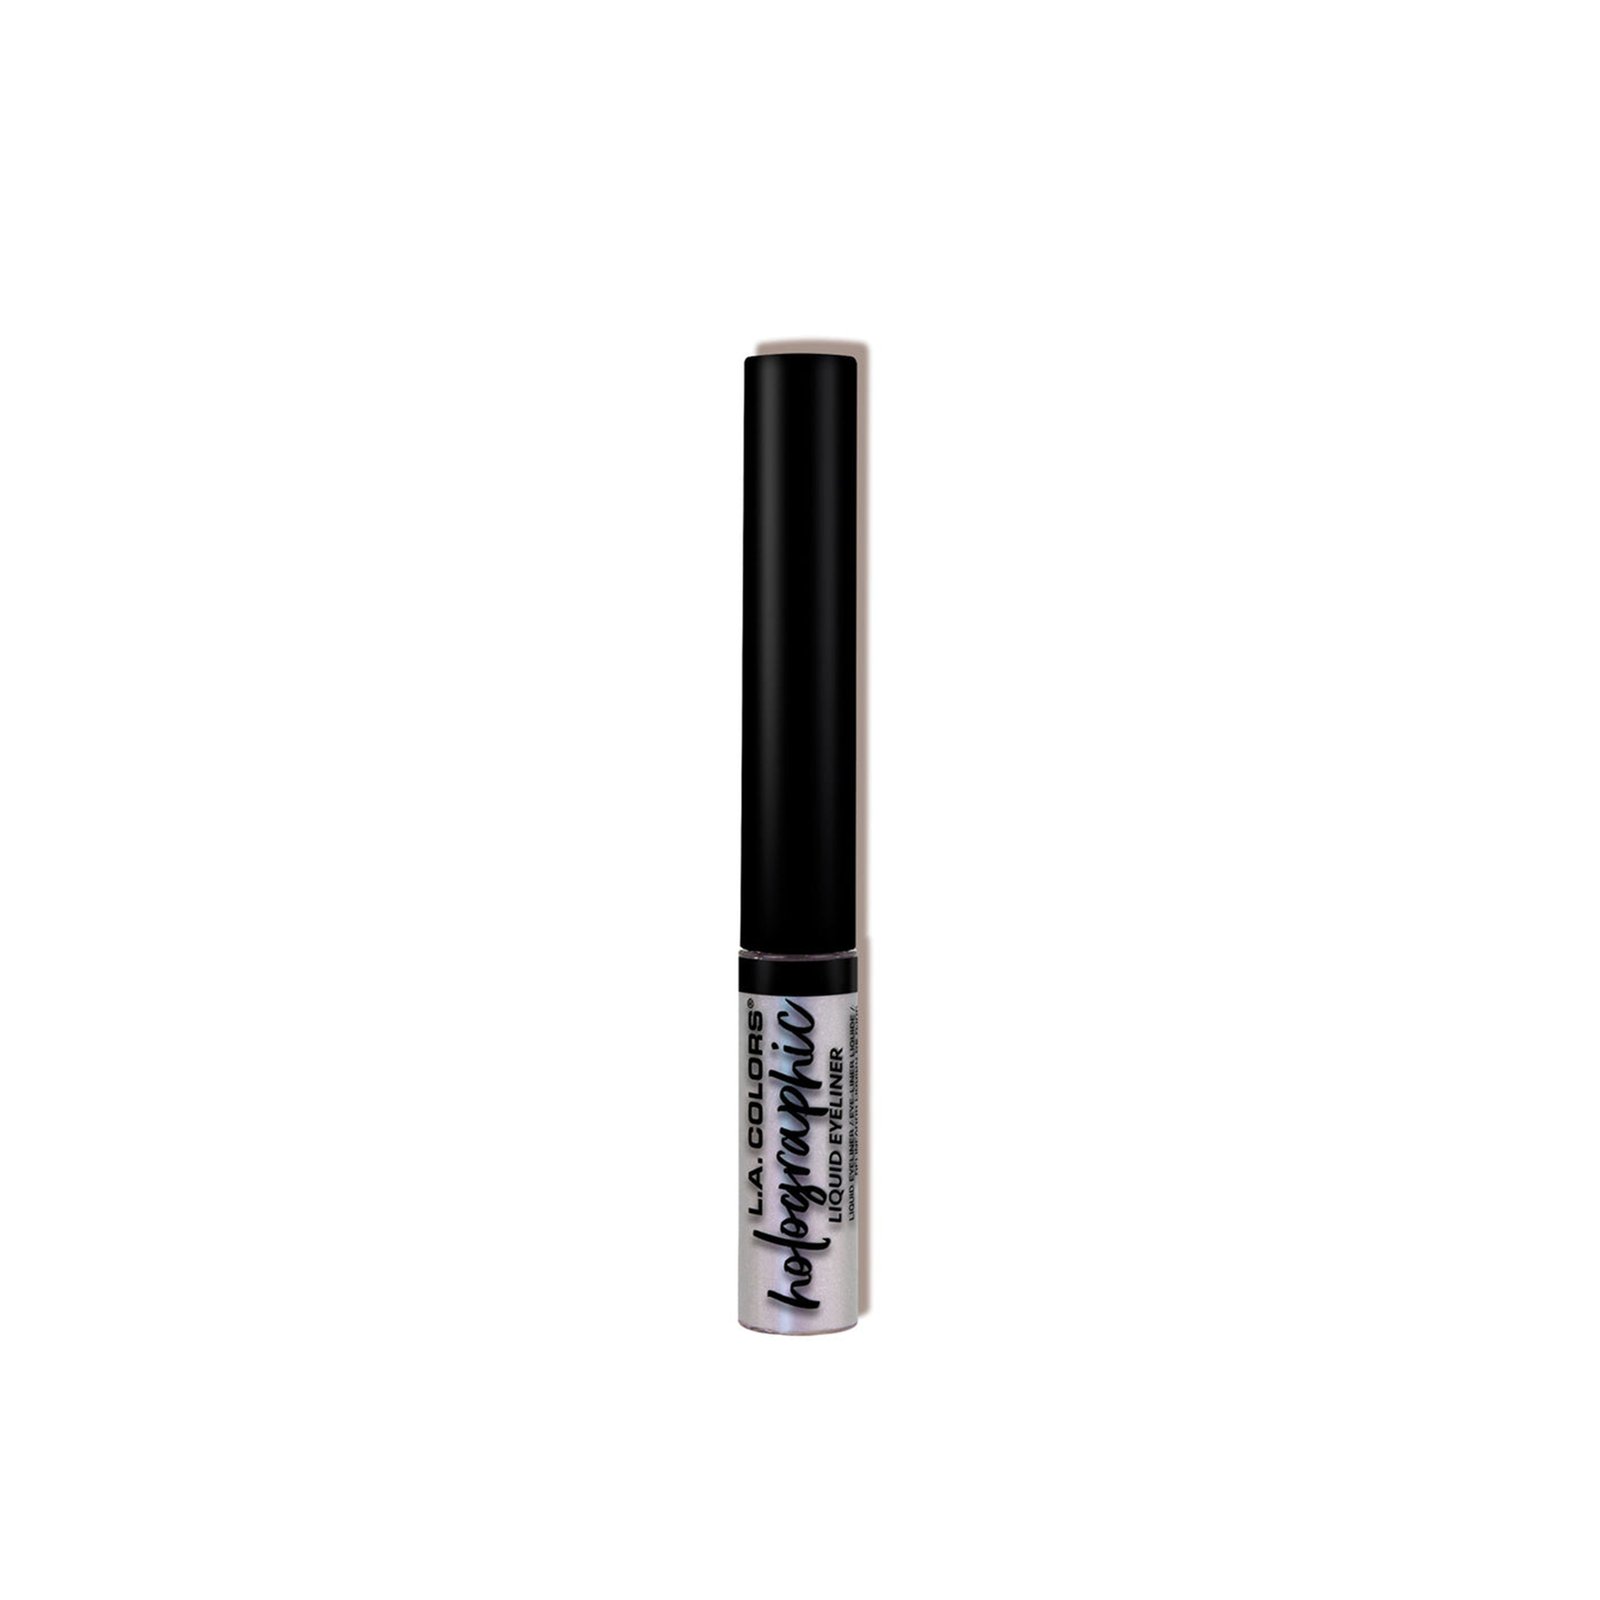 L.A. Colors Liquid Eyeliner Holographic CLE807 Holographic Iridescent Flash 5ml (0.17 fl oz)